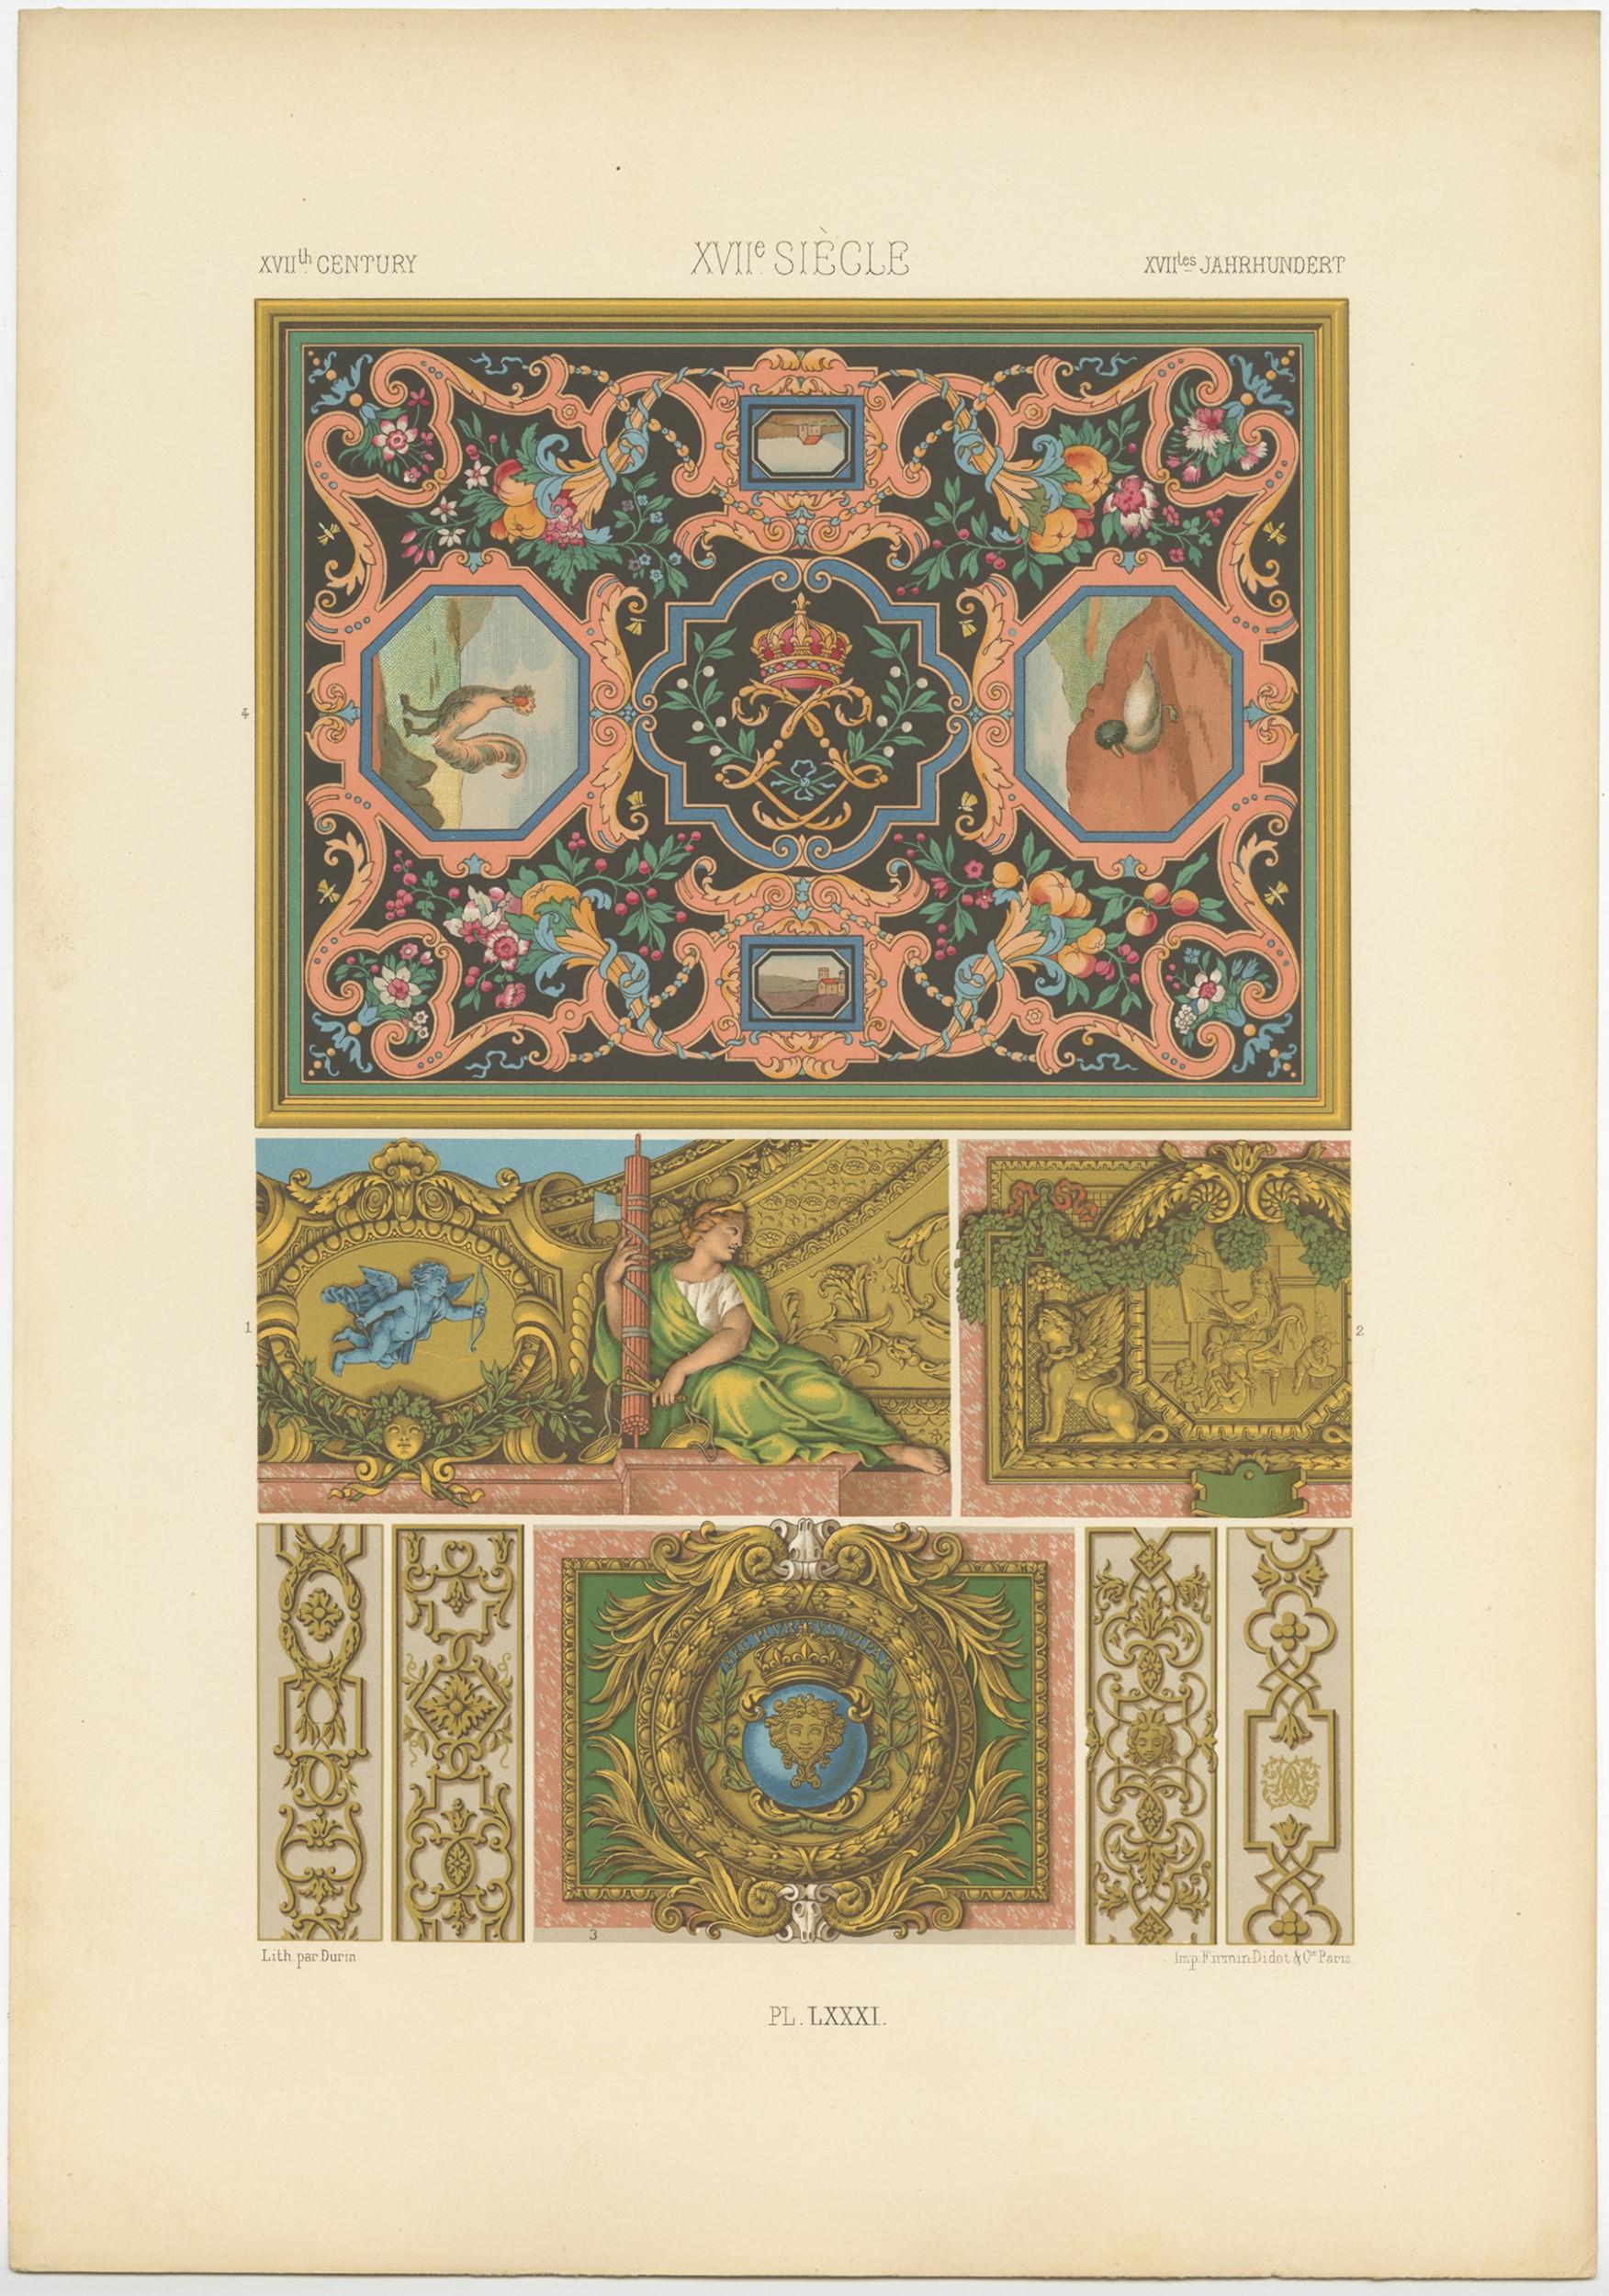 Antique print titled ' XVIIth Century - XVIIe Siecle - XVIItes Jahrhundert'. Chromolithograph of 17th century ornaments and decorative arts. This print originates from 'l'Ornement Polychrome' by Auguste Racinet. Published, circa 1890.